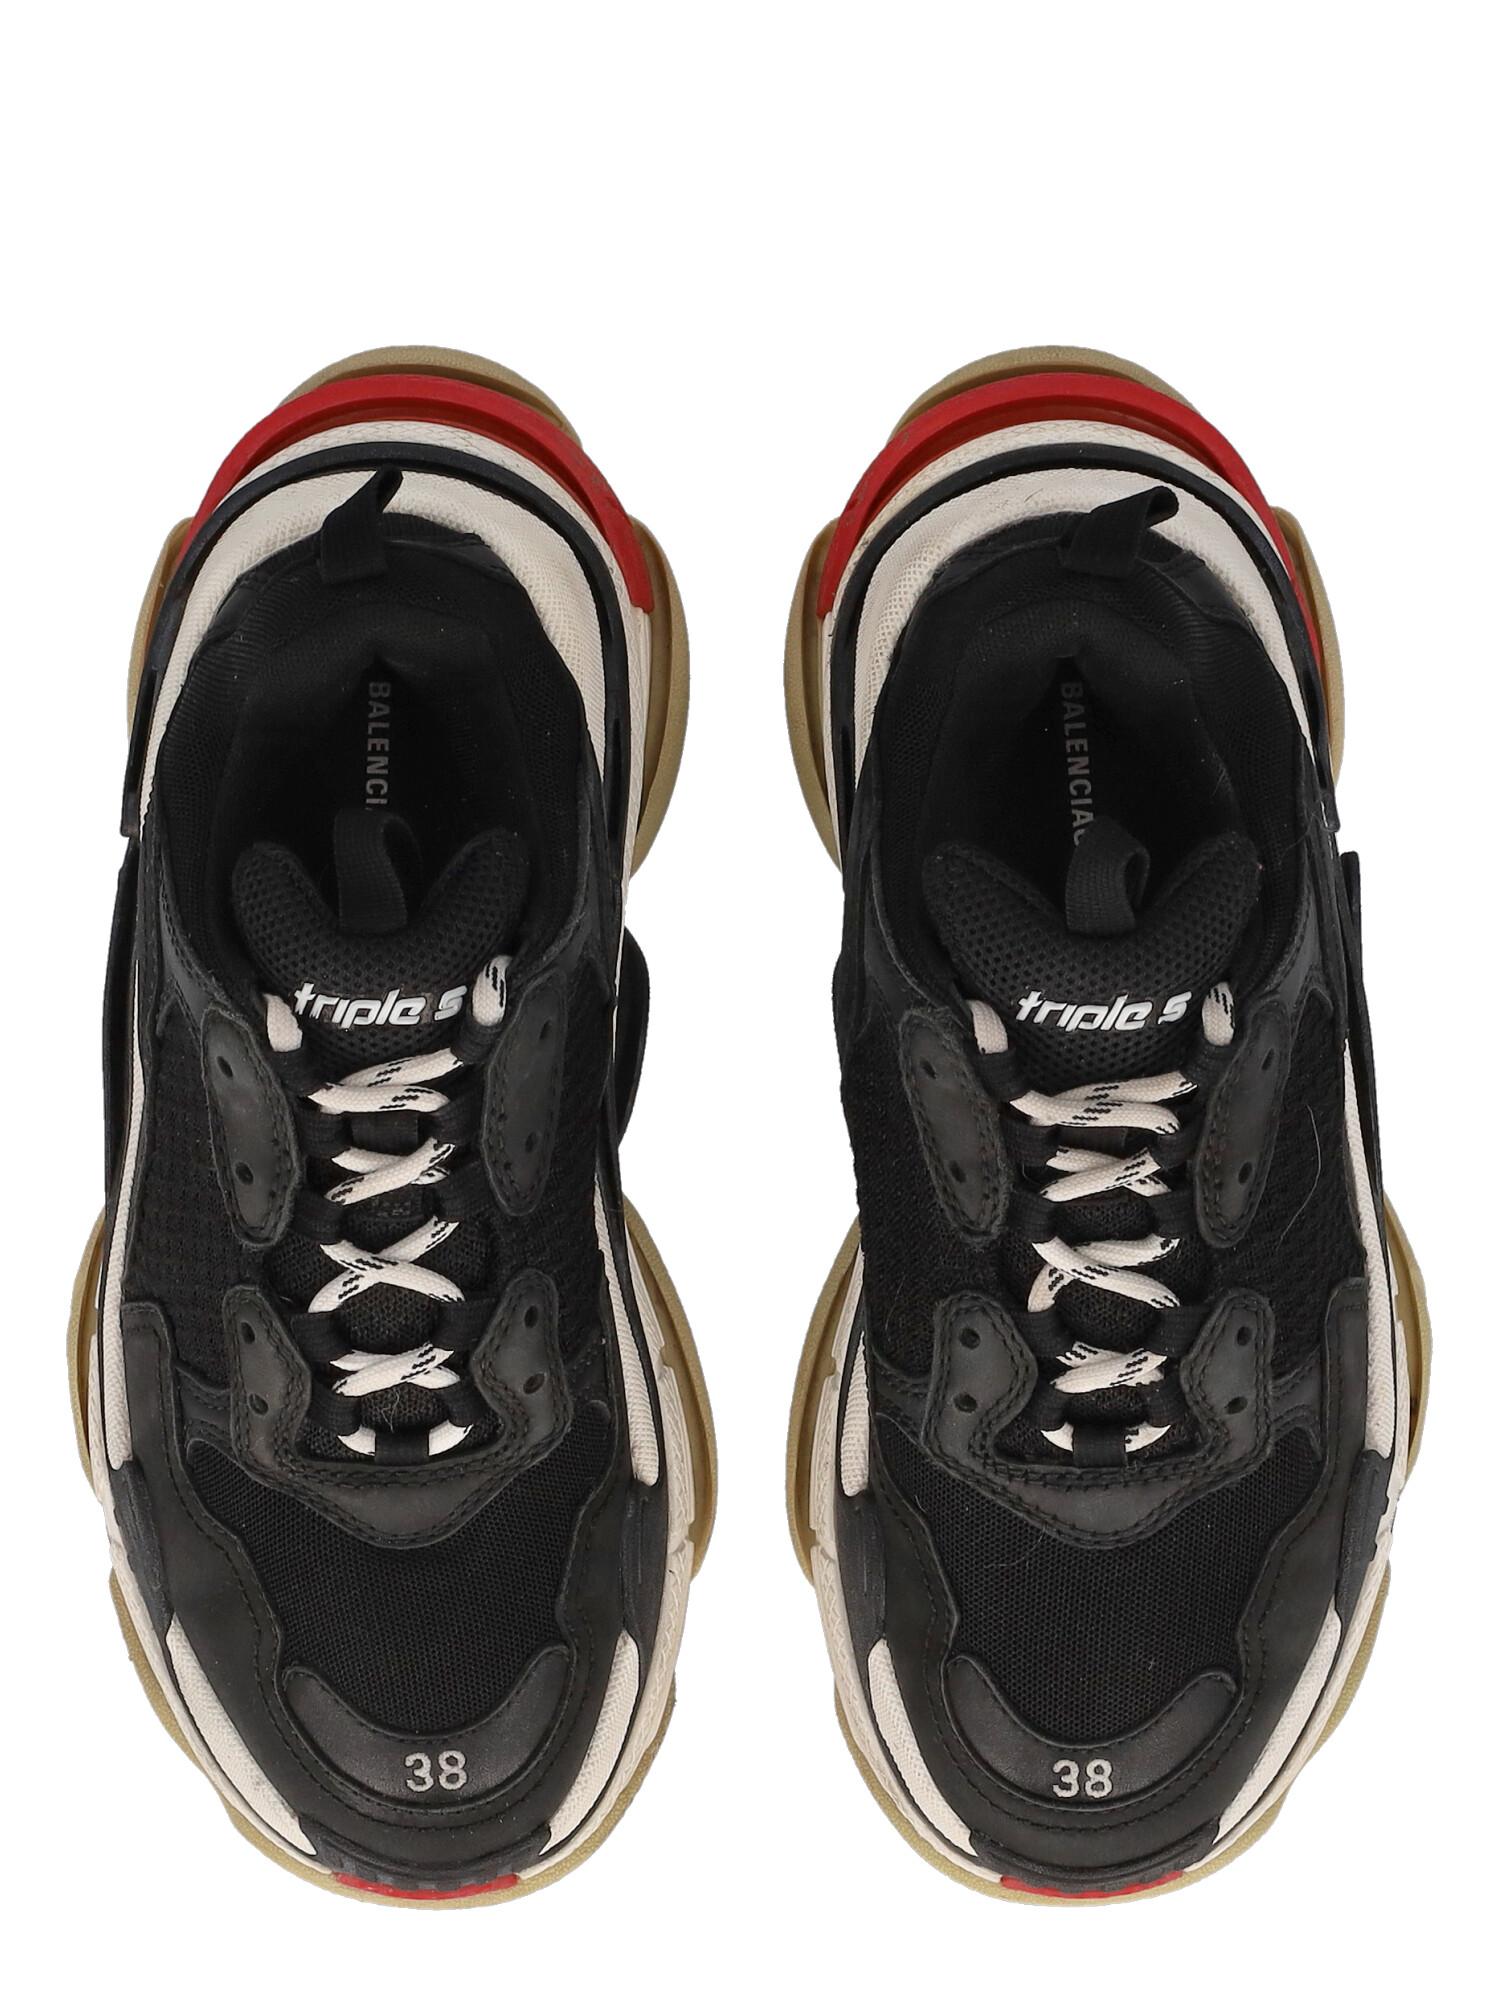 Balenciaga Women Sneakers Black, Red, White Leather EU 38 In Good Condition For Sale In Milan, IT